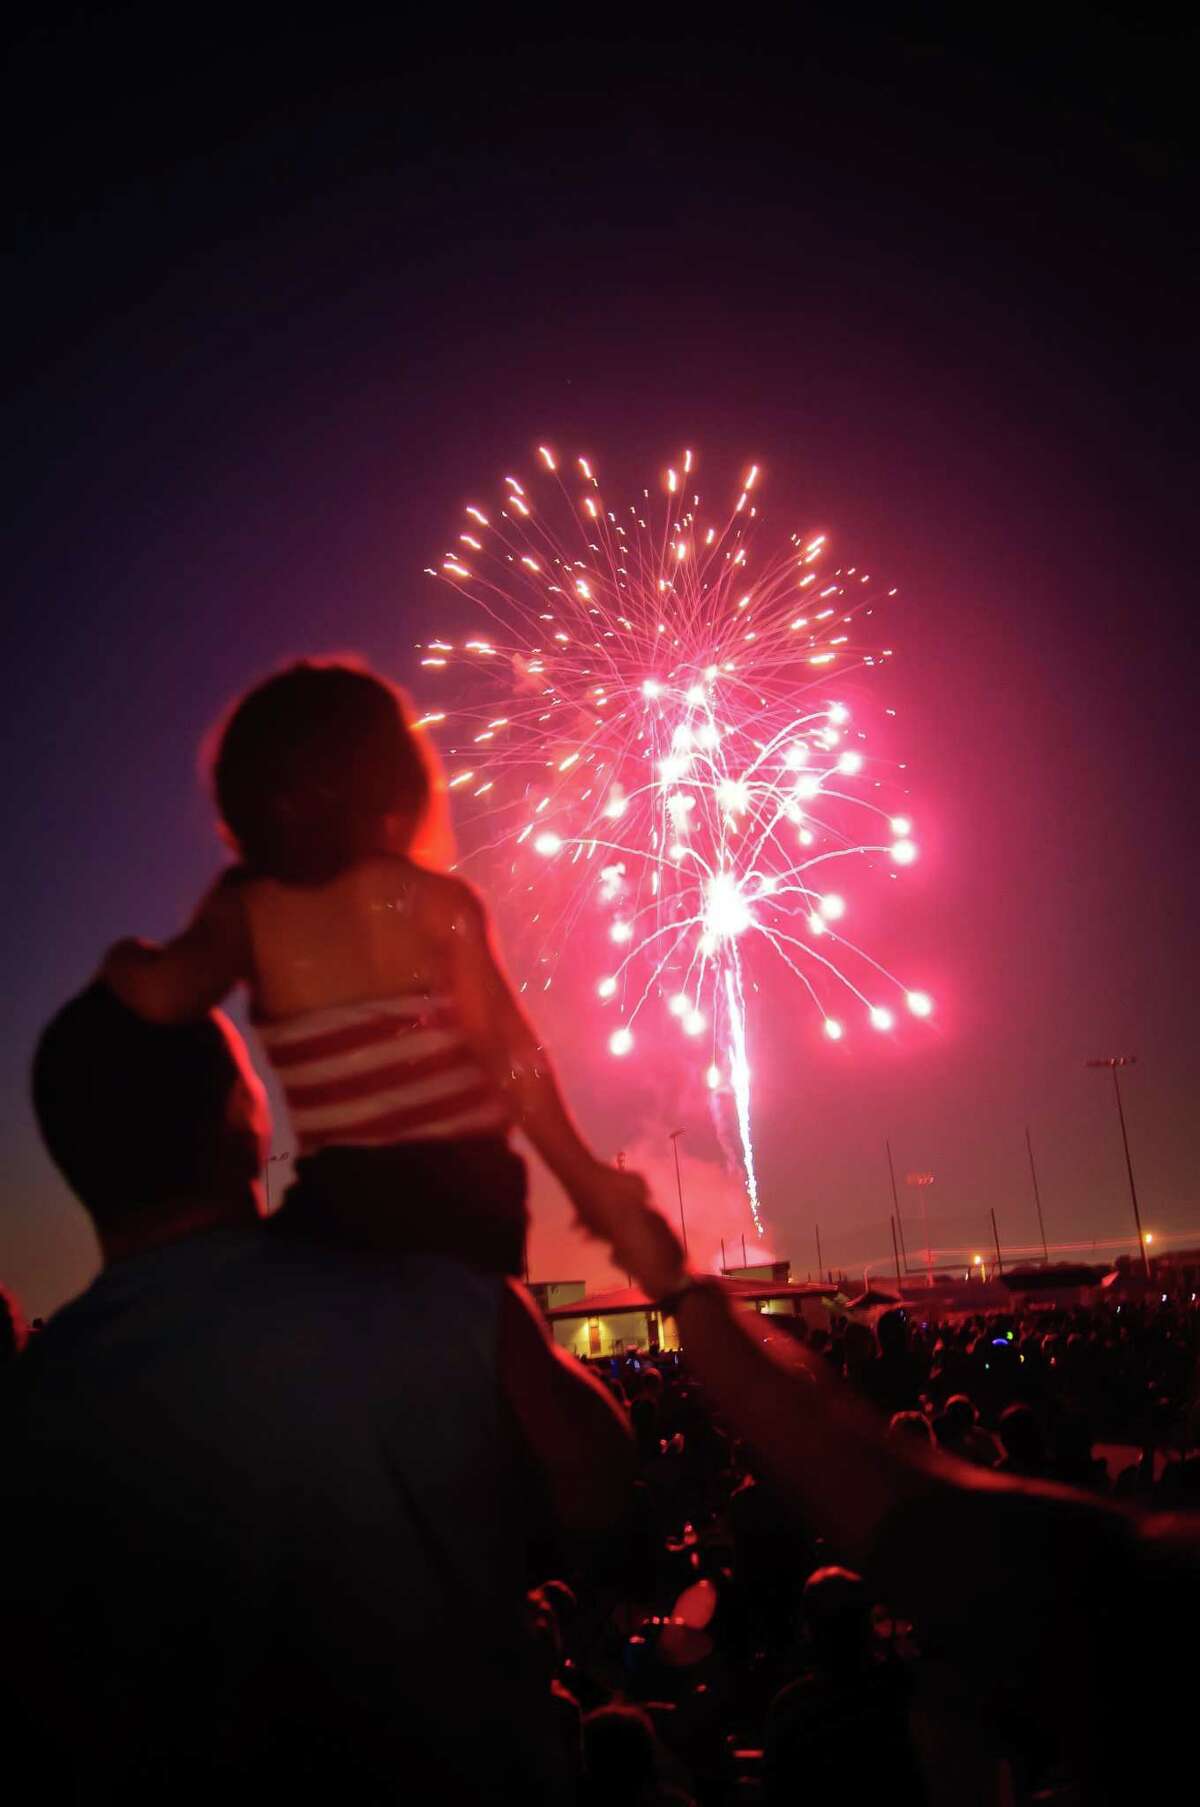 In addition to the annual tradition of a fireworks display, the city of Pearland’s Fourth of July celebration this year will be at Independence Park, where the event will showcase new features such as an amphitheater, stage, new playground and a mural. The musical headline act is former “The Voice” performer Jake Worthington at 8 p.m.